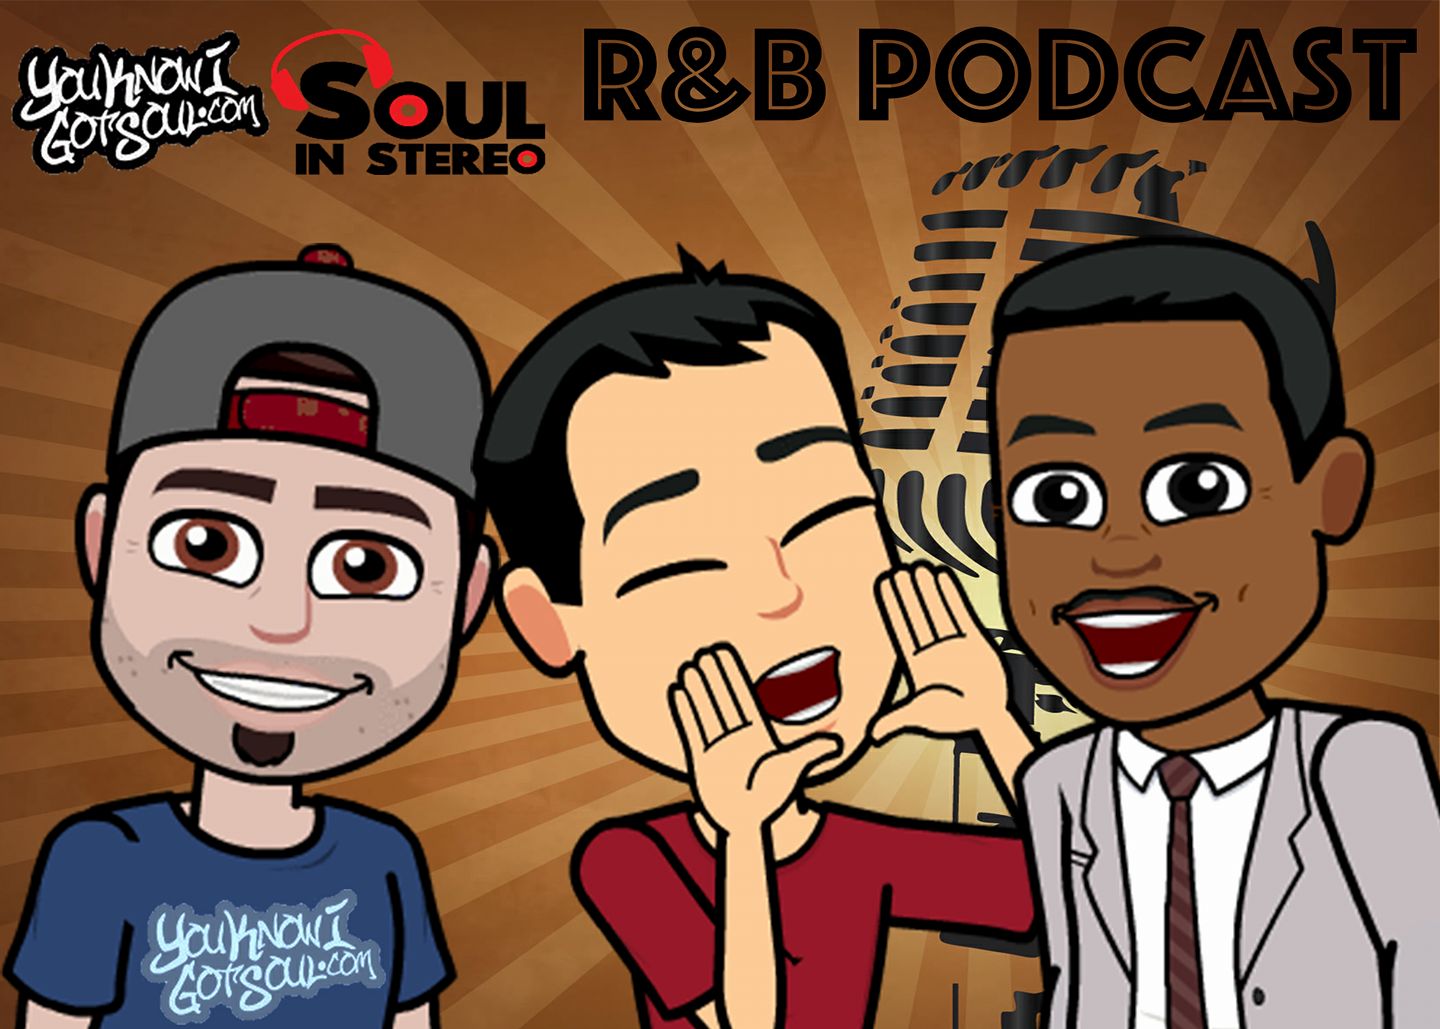 R&B Predictions At The 2018 Grammys – YouKnowIGotSoul R&B Podcast Episode #70